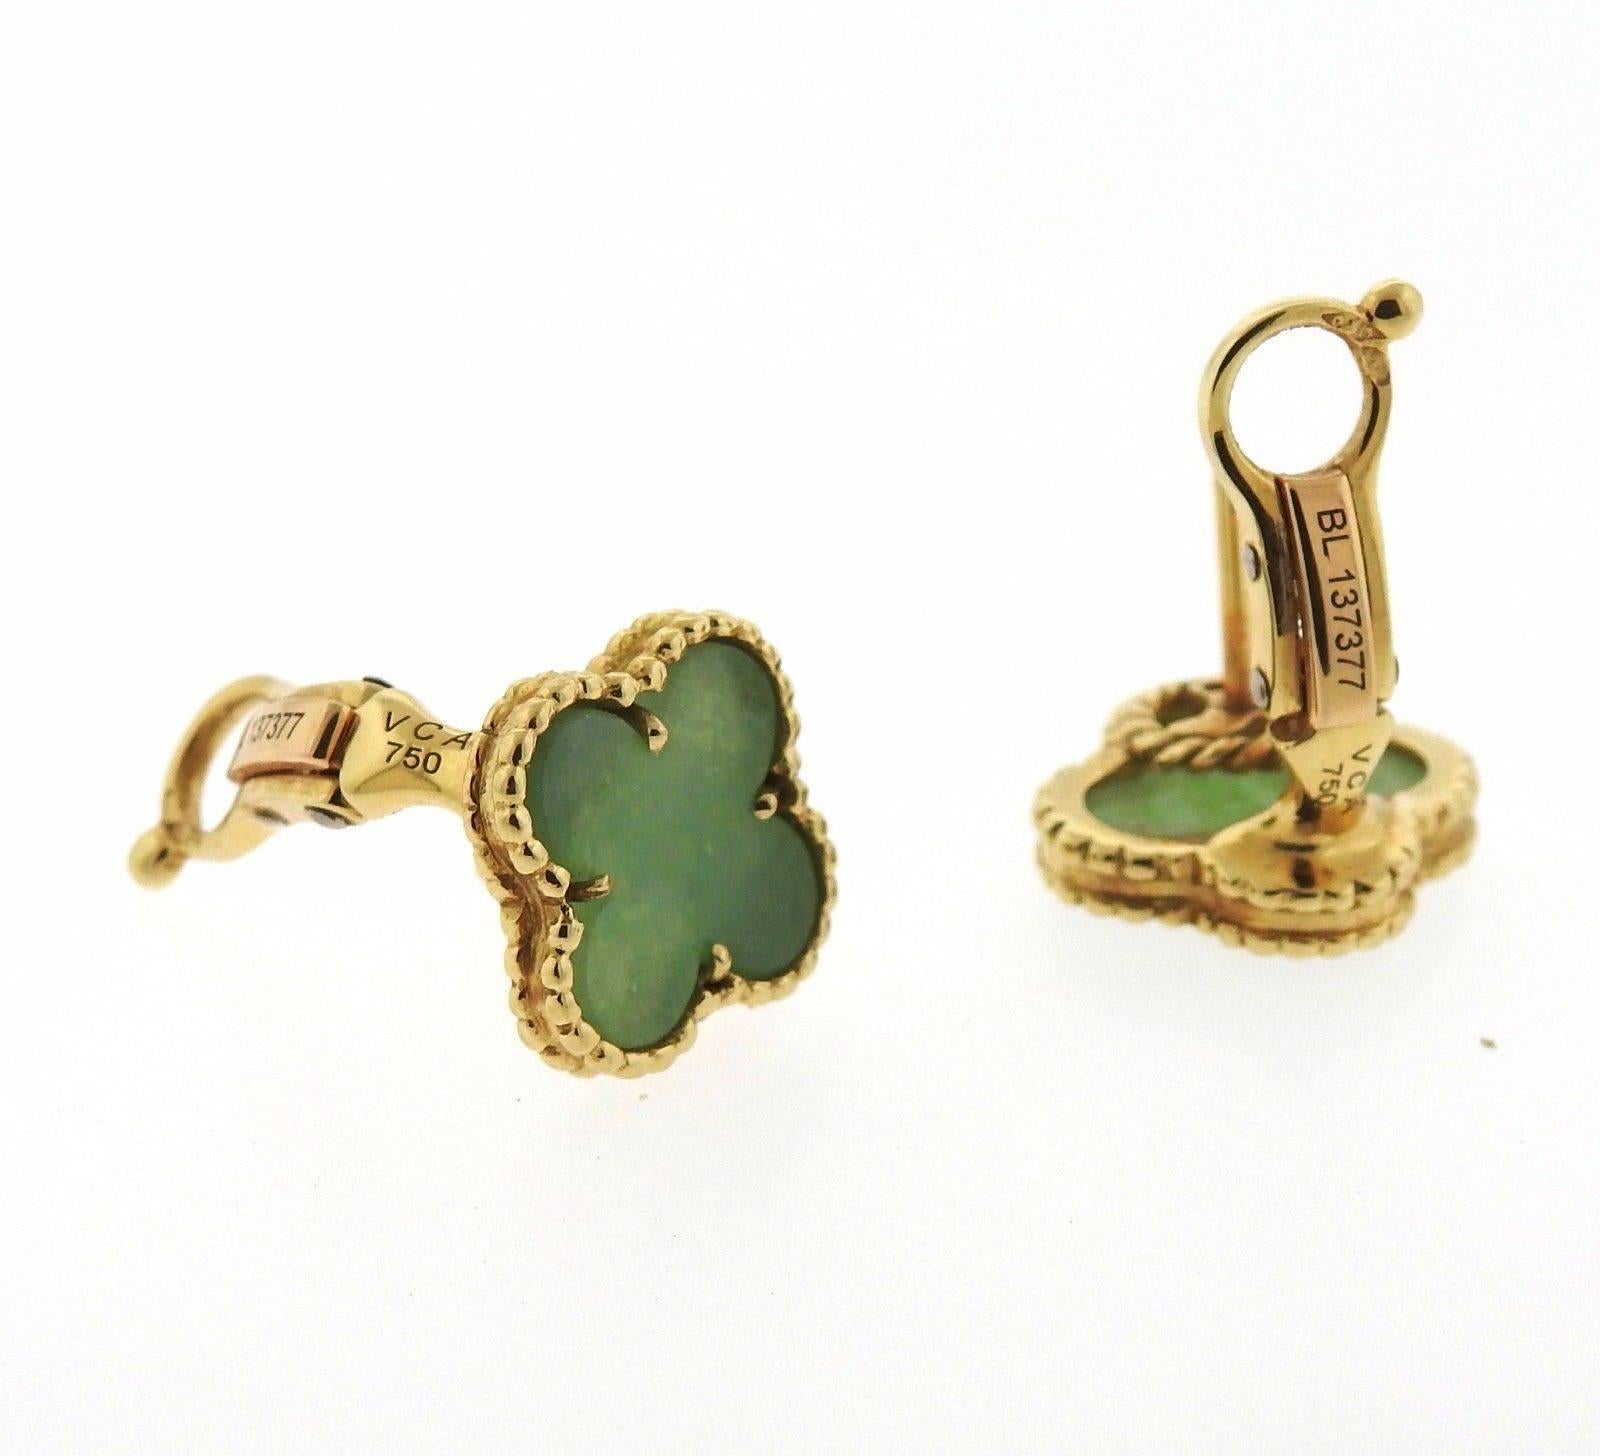 A pair of 18k yellow gold and jade earrings from the Vintage Alhambra collection by Van Cleef & Arpels.  The earrings measure 14.7mm x 14.4mm and weigh 8.2 grams.  Marked: VCA, 750, BL137377.  Come with VCA pouch.